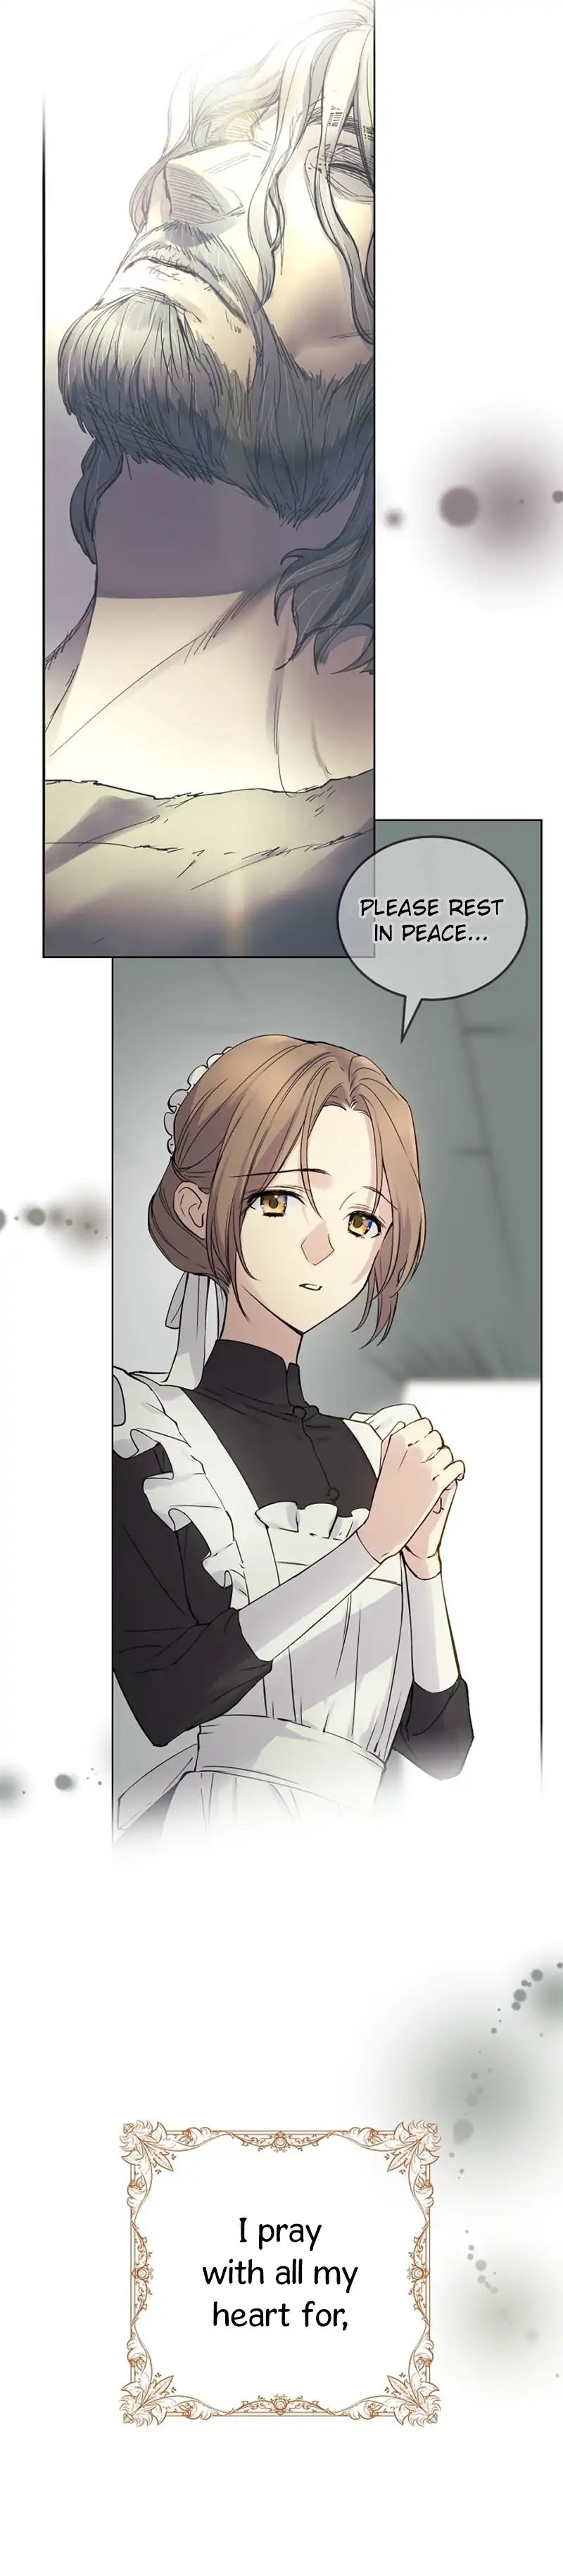 A Capable Maid chapter 1